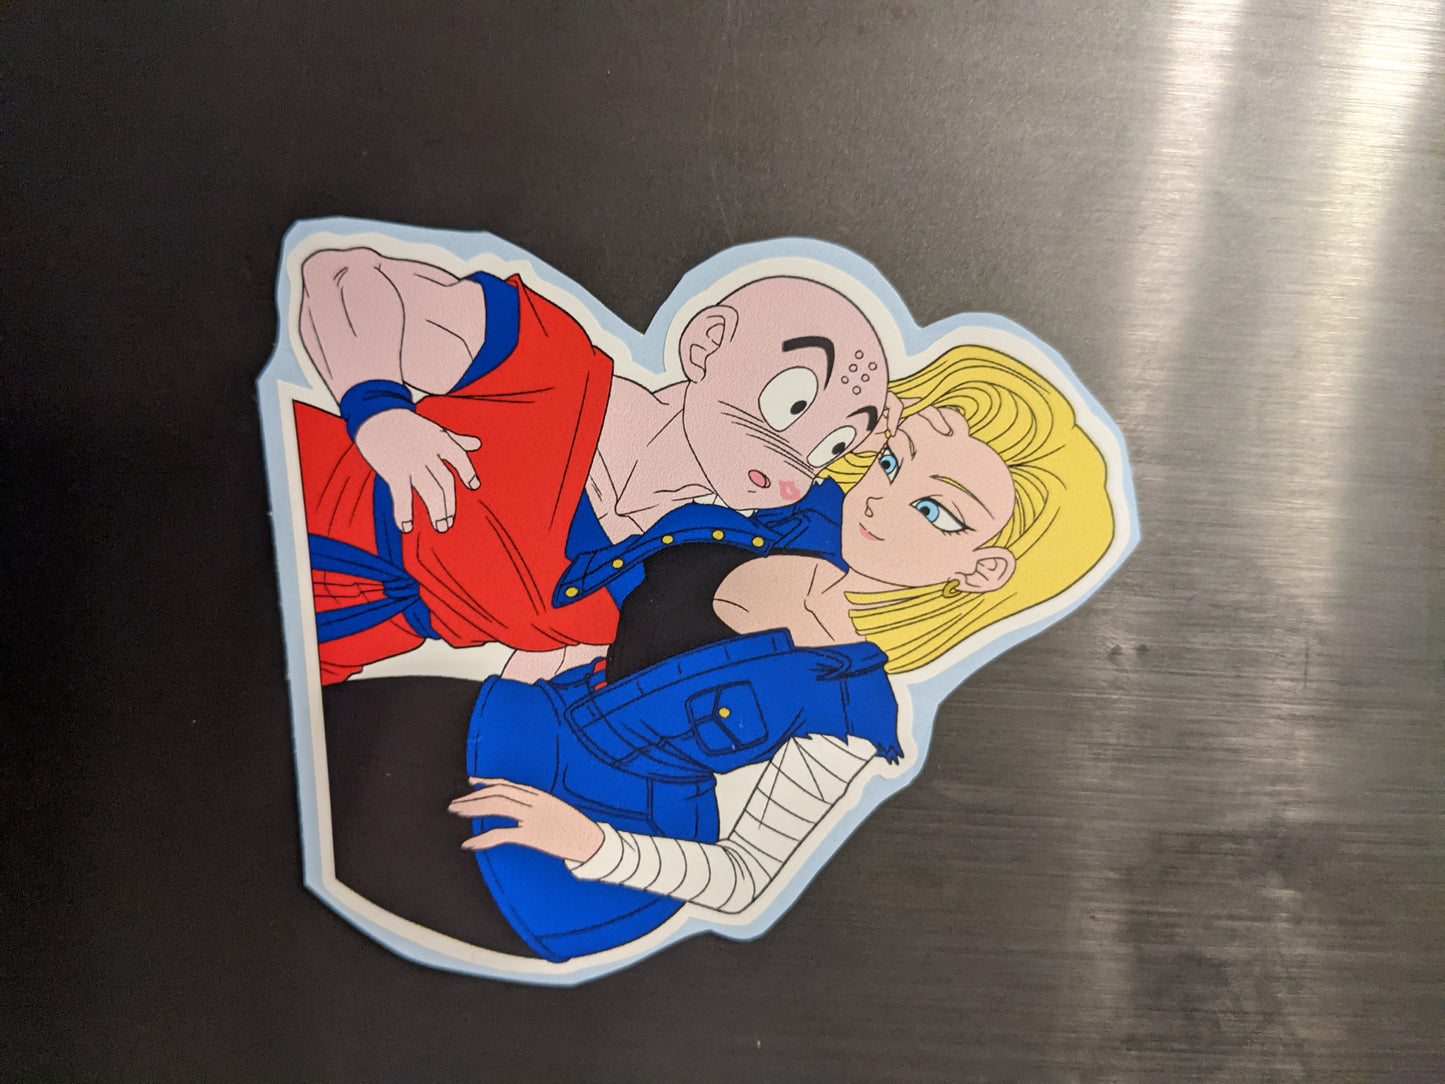 Android 18 x Krillin Pin